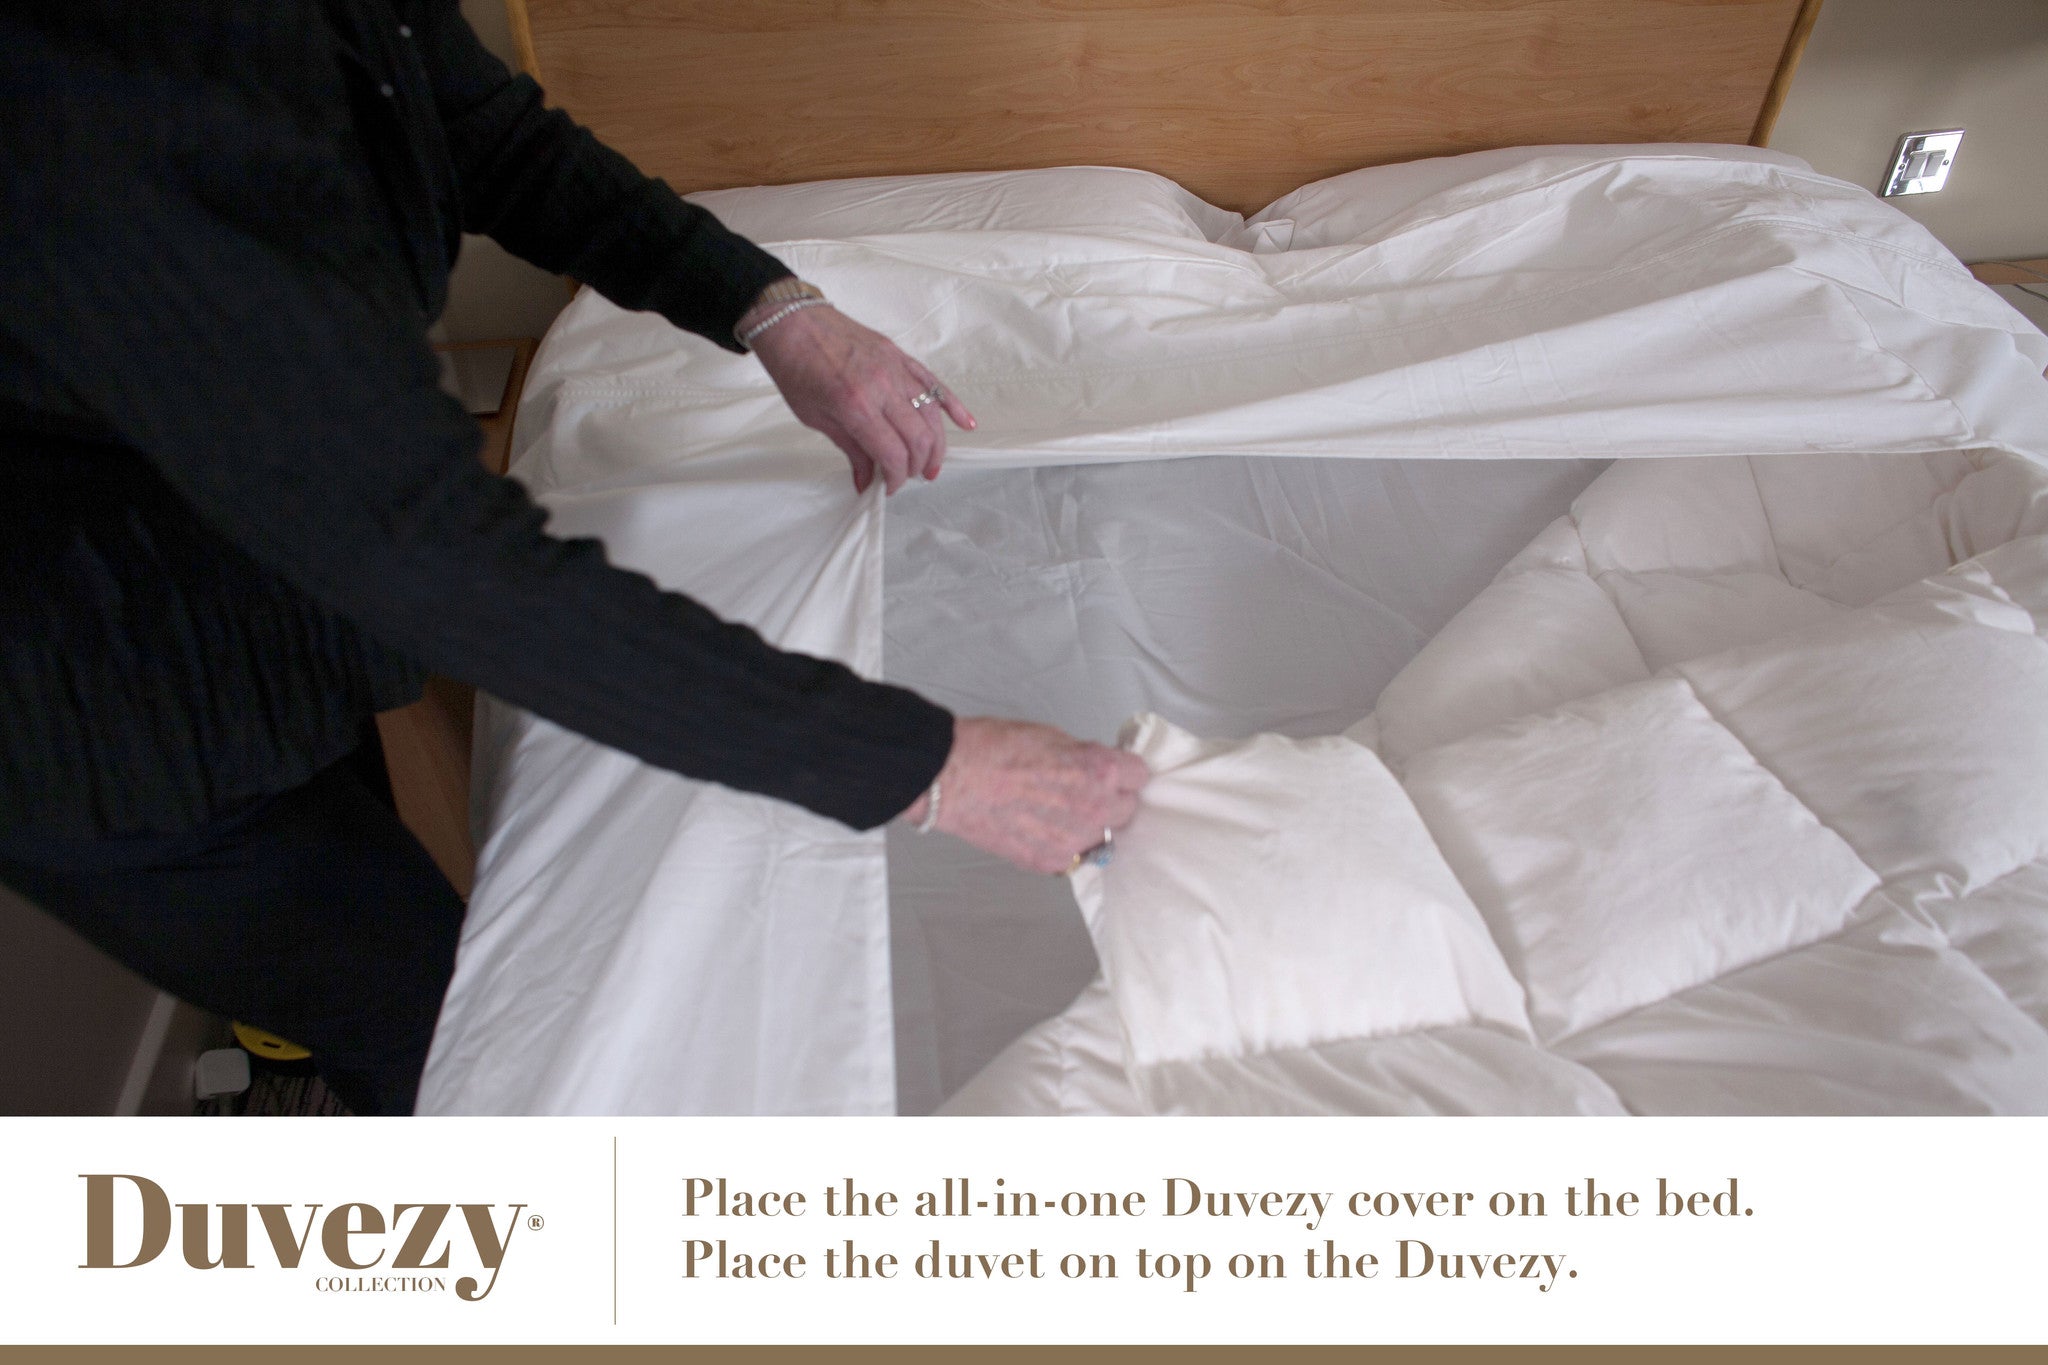 Duvezy Duvets Hassle Free Duvet And Pillows Online For Sale